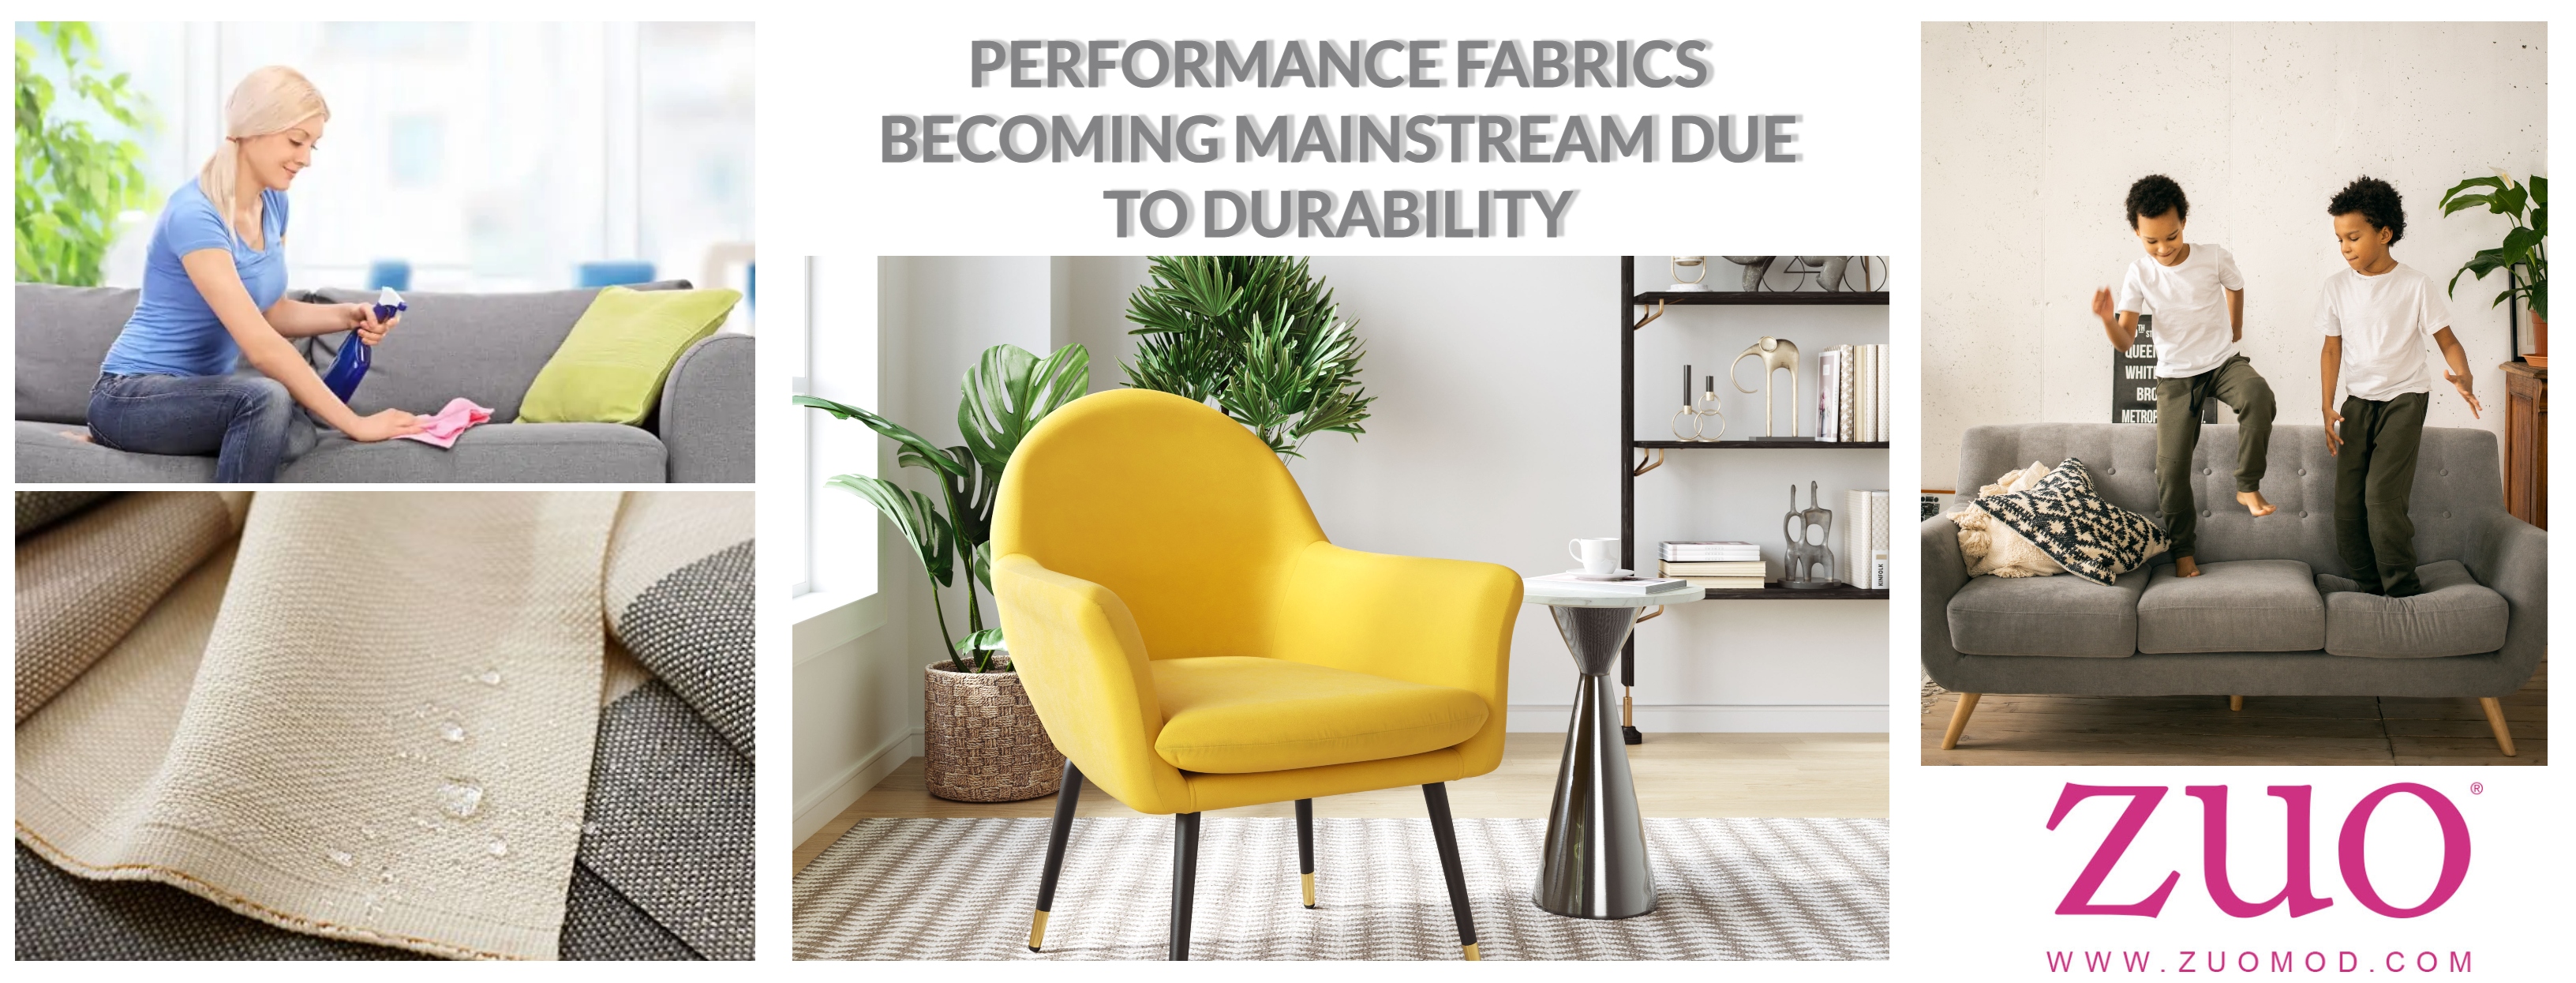 No longer a luxury, performance fabrics becoming mainstream due to durability, ease of stain removal